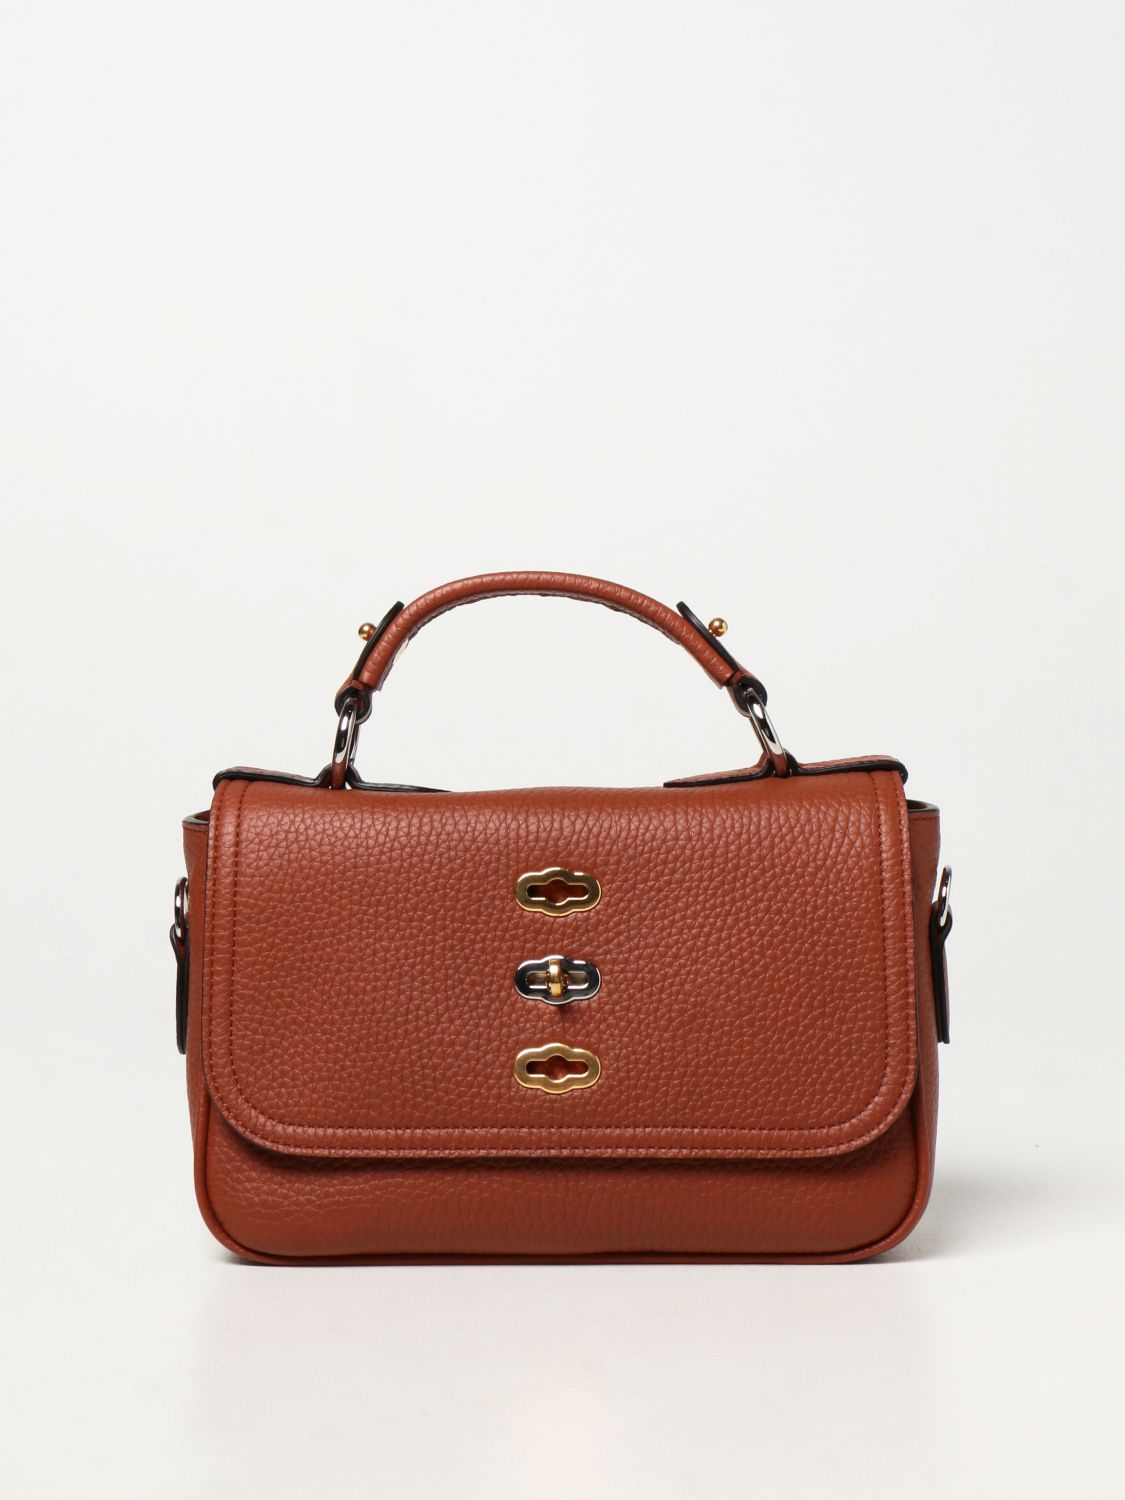 MULBERRY: Bryn bag in textured leather - Leather | Mulberry handbag ...